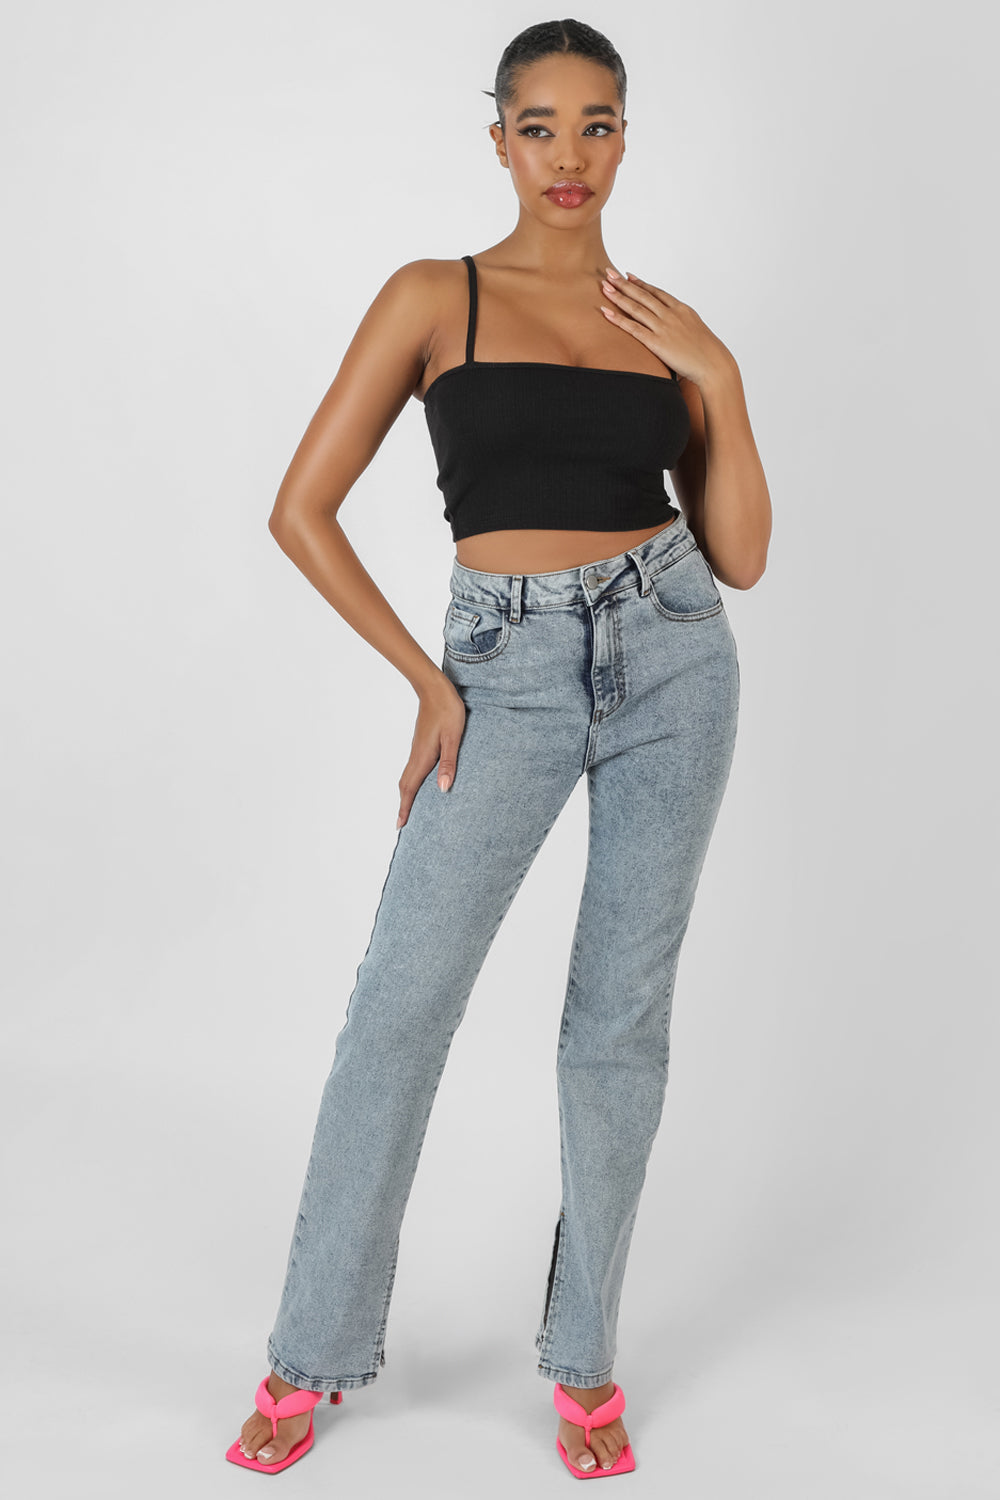 SQUARE NECK RIBBED CROPPED TOP BLACK